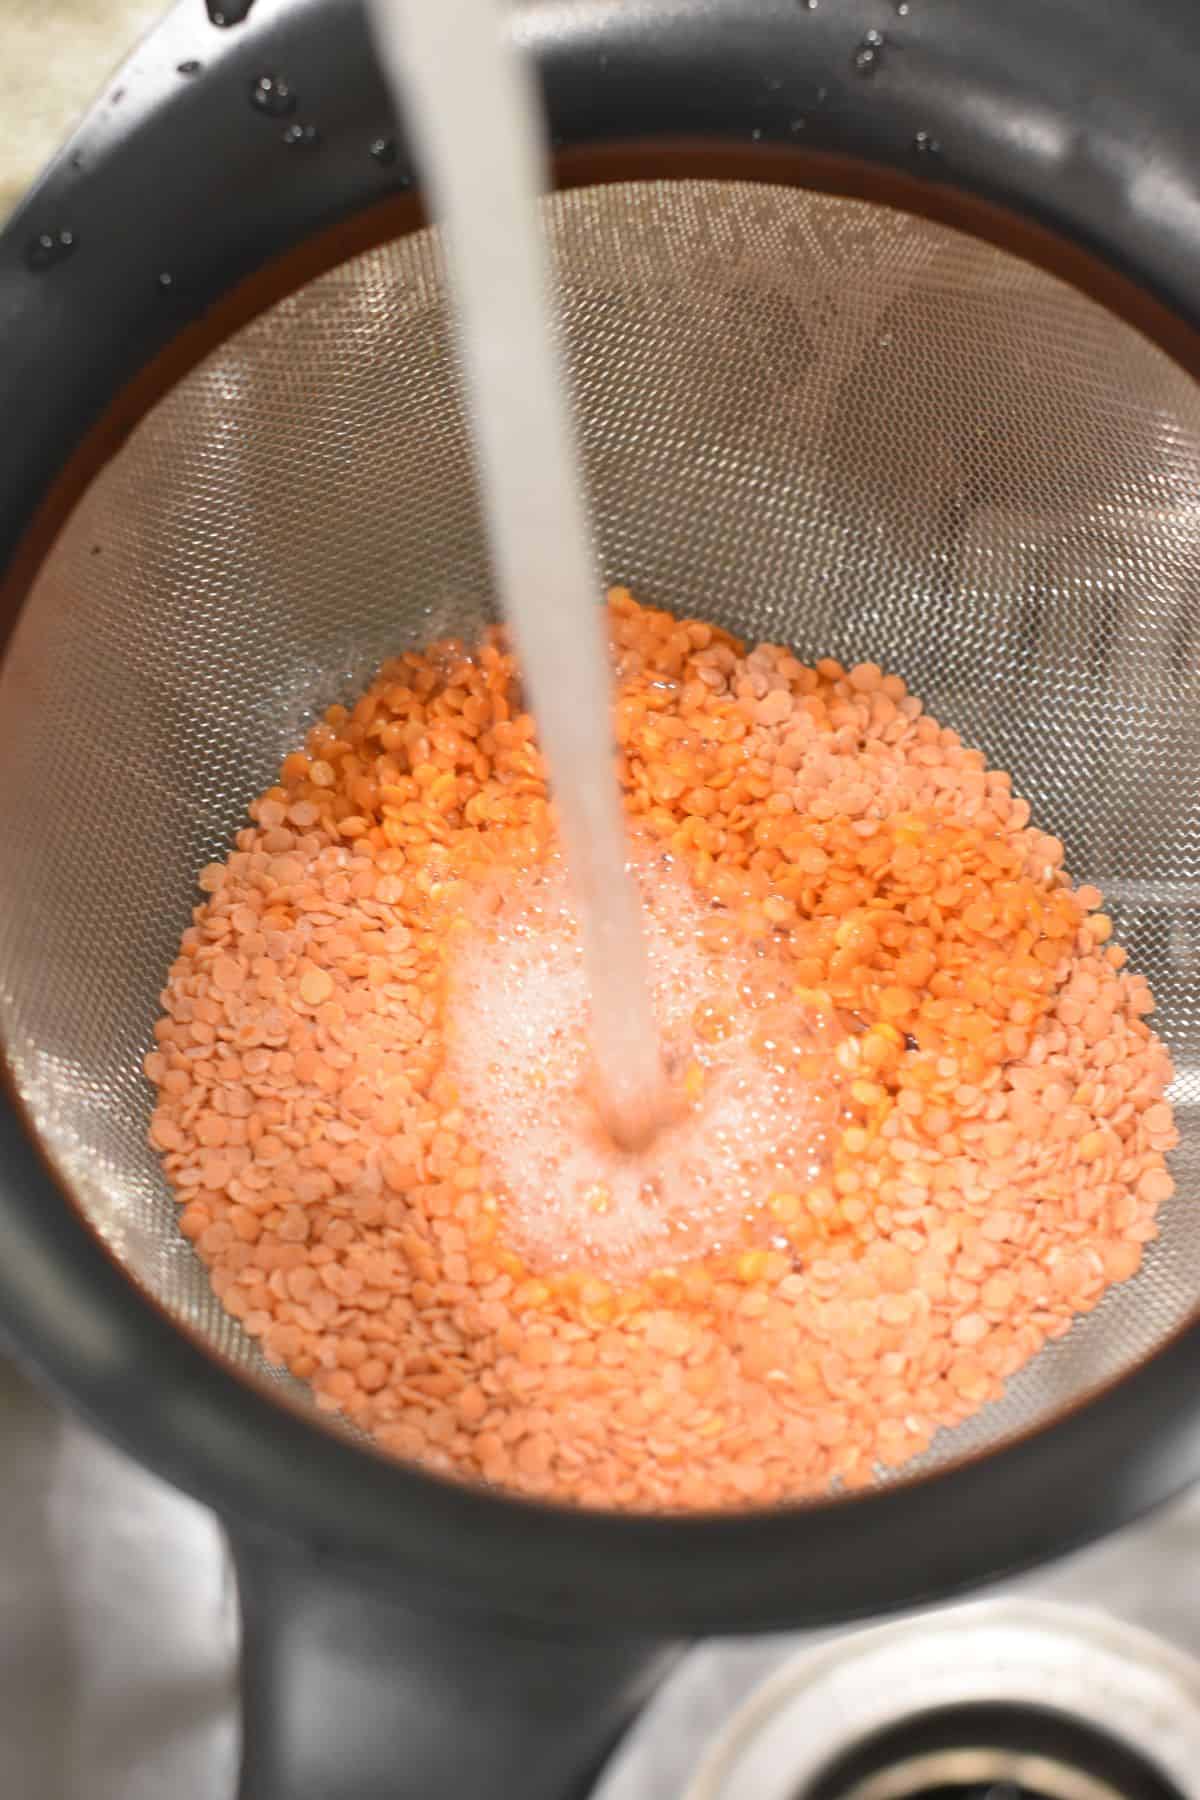 rinsing red lentils in a colander in the sink.